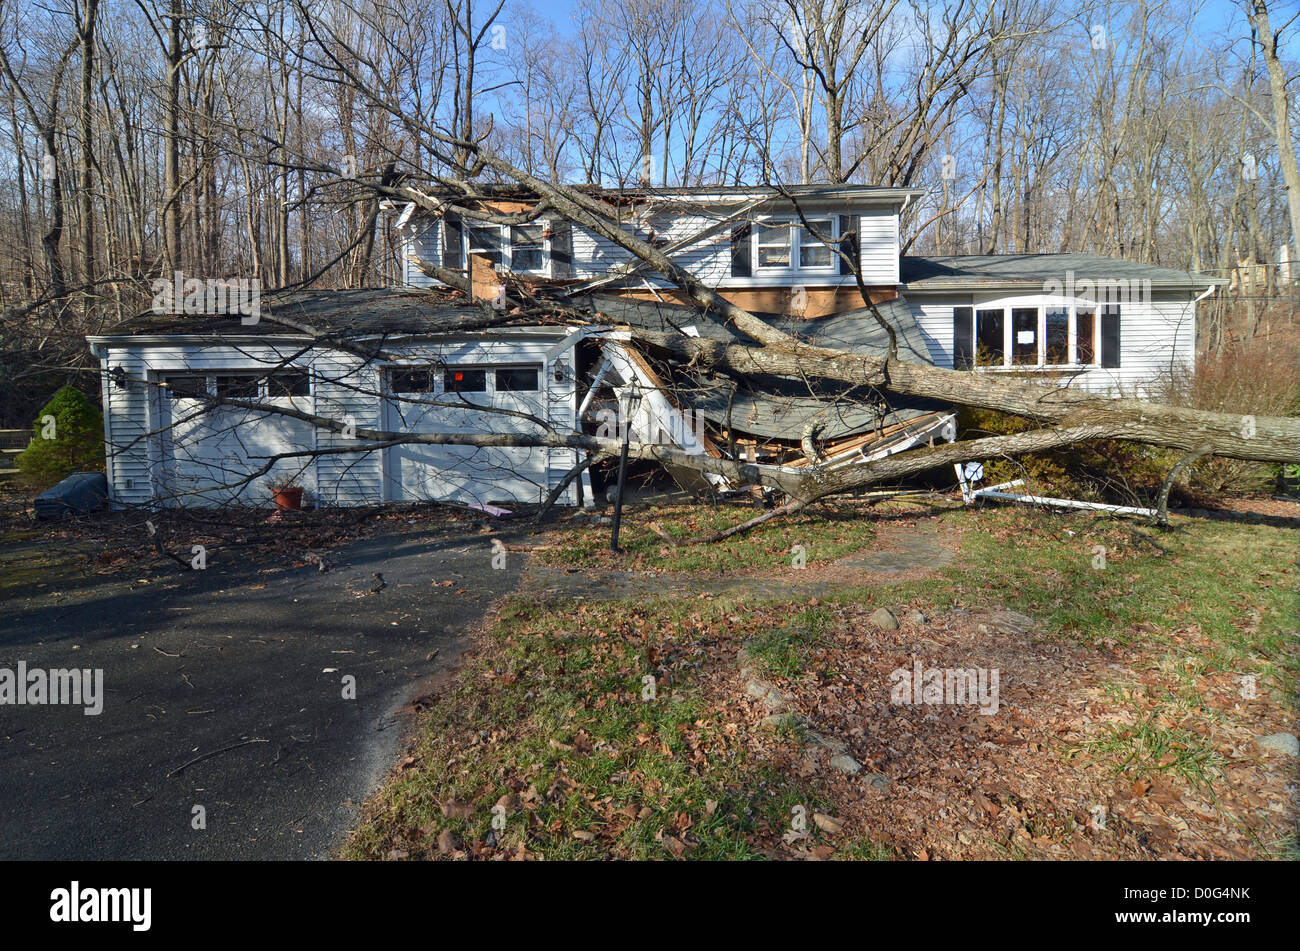 High winds caused by Superstorm Sandy on Oct. 29, 2012, blew down many trees in Sussex county. Byram was hit especially hard with many trees falling on the roofs of homes causing major structural damage. Stock Photo